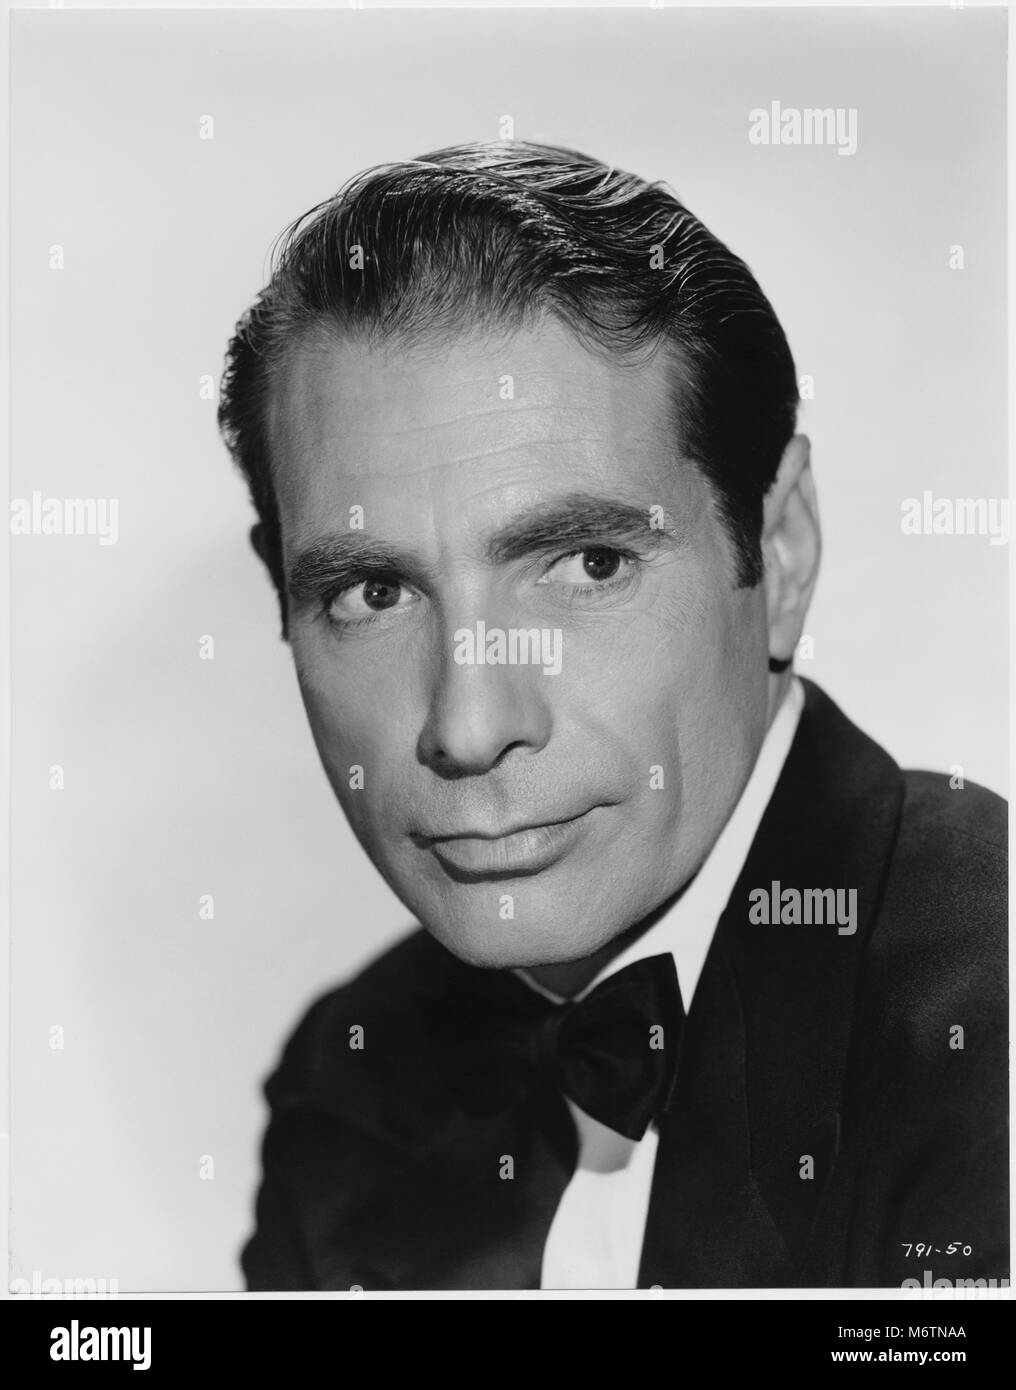 Gary Merrill, Publicity Portrait for the Film, 'All About Eve', 20th Century Fox, 1950 Stock Photo